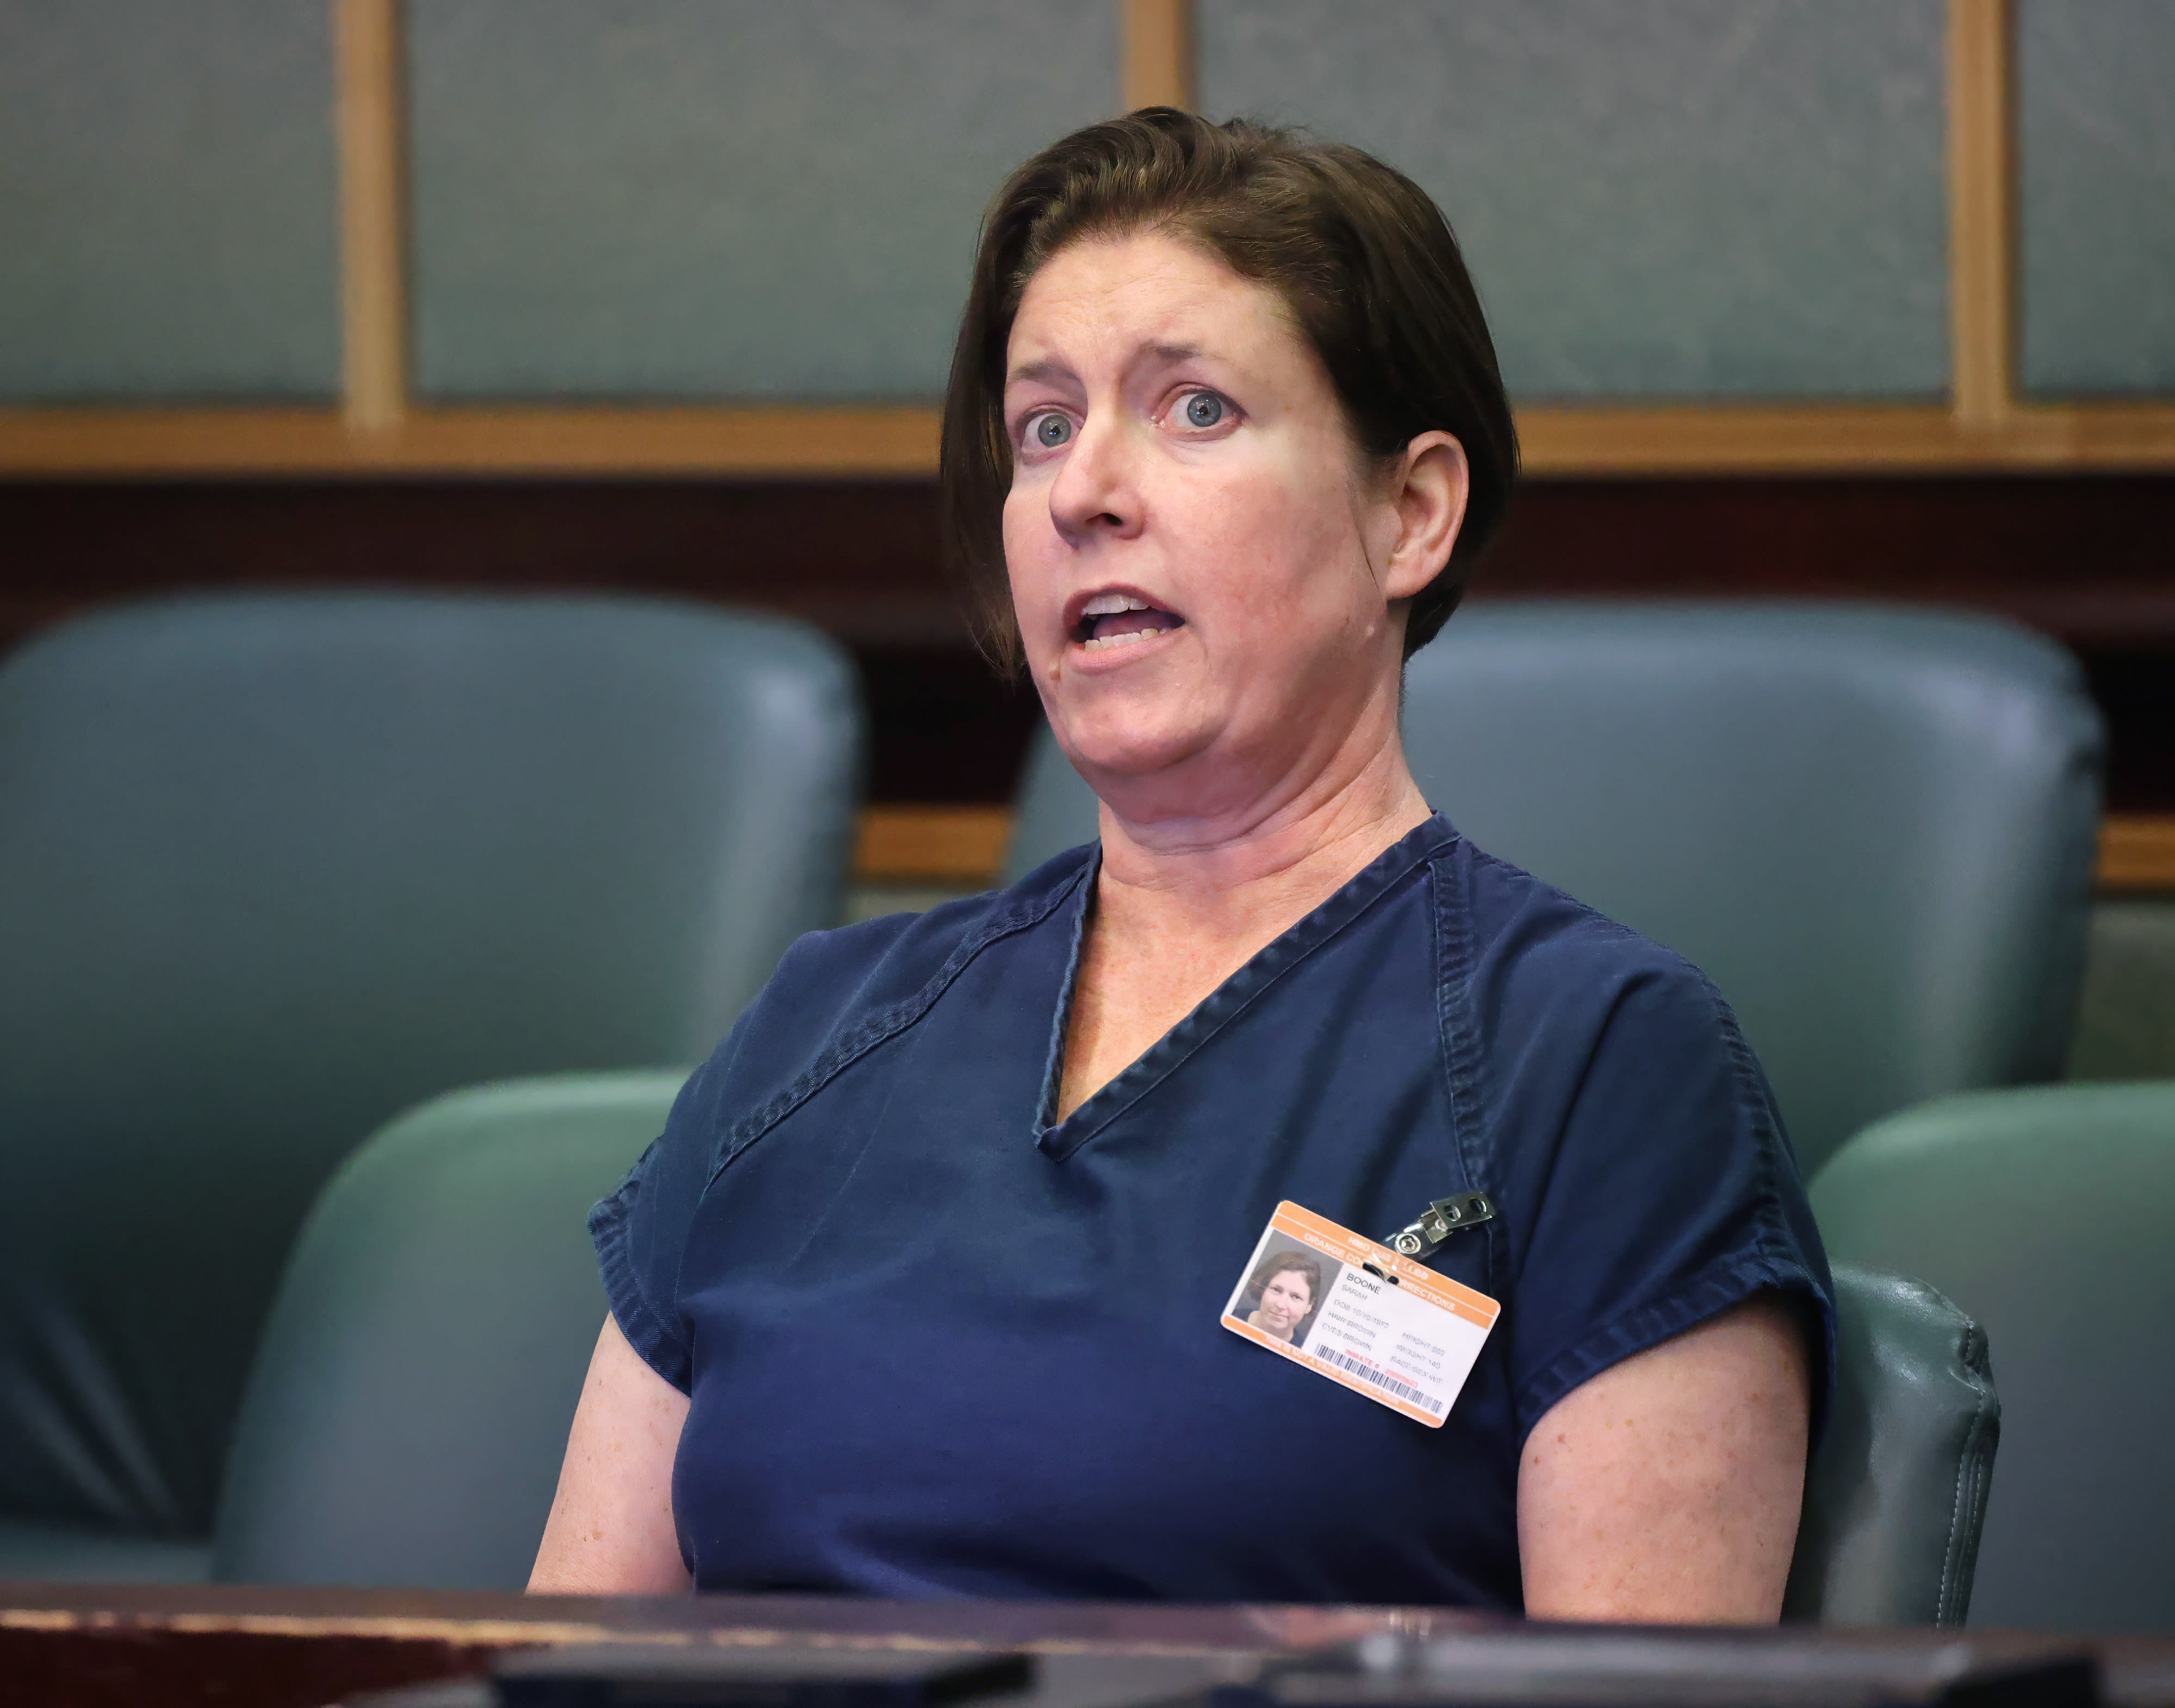 After burning through 7 attorneys, Winter Park woman charged in 2020 suitcase killing slams the 8th